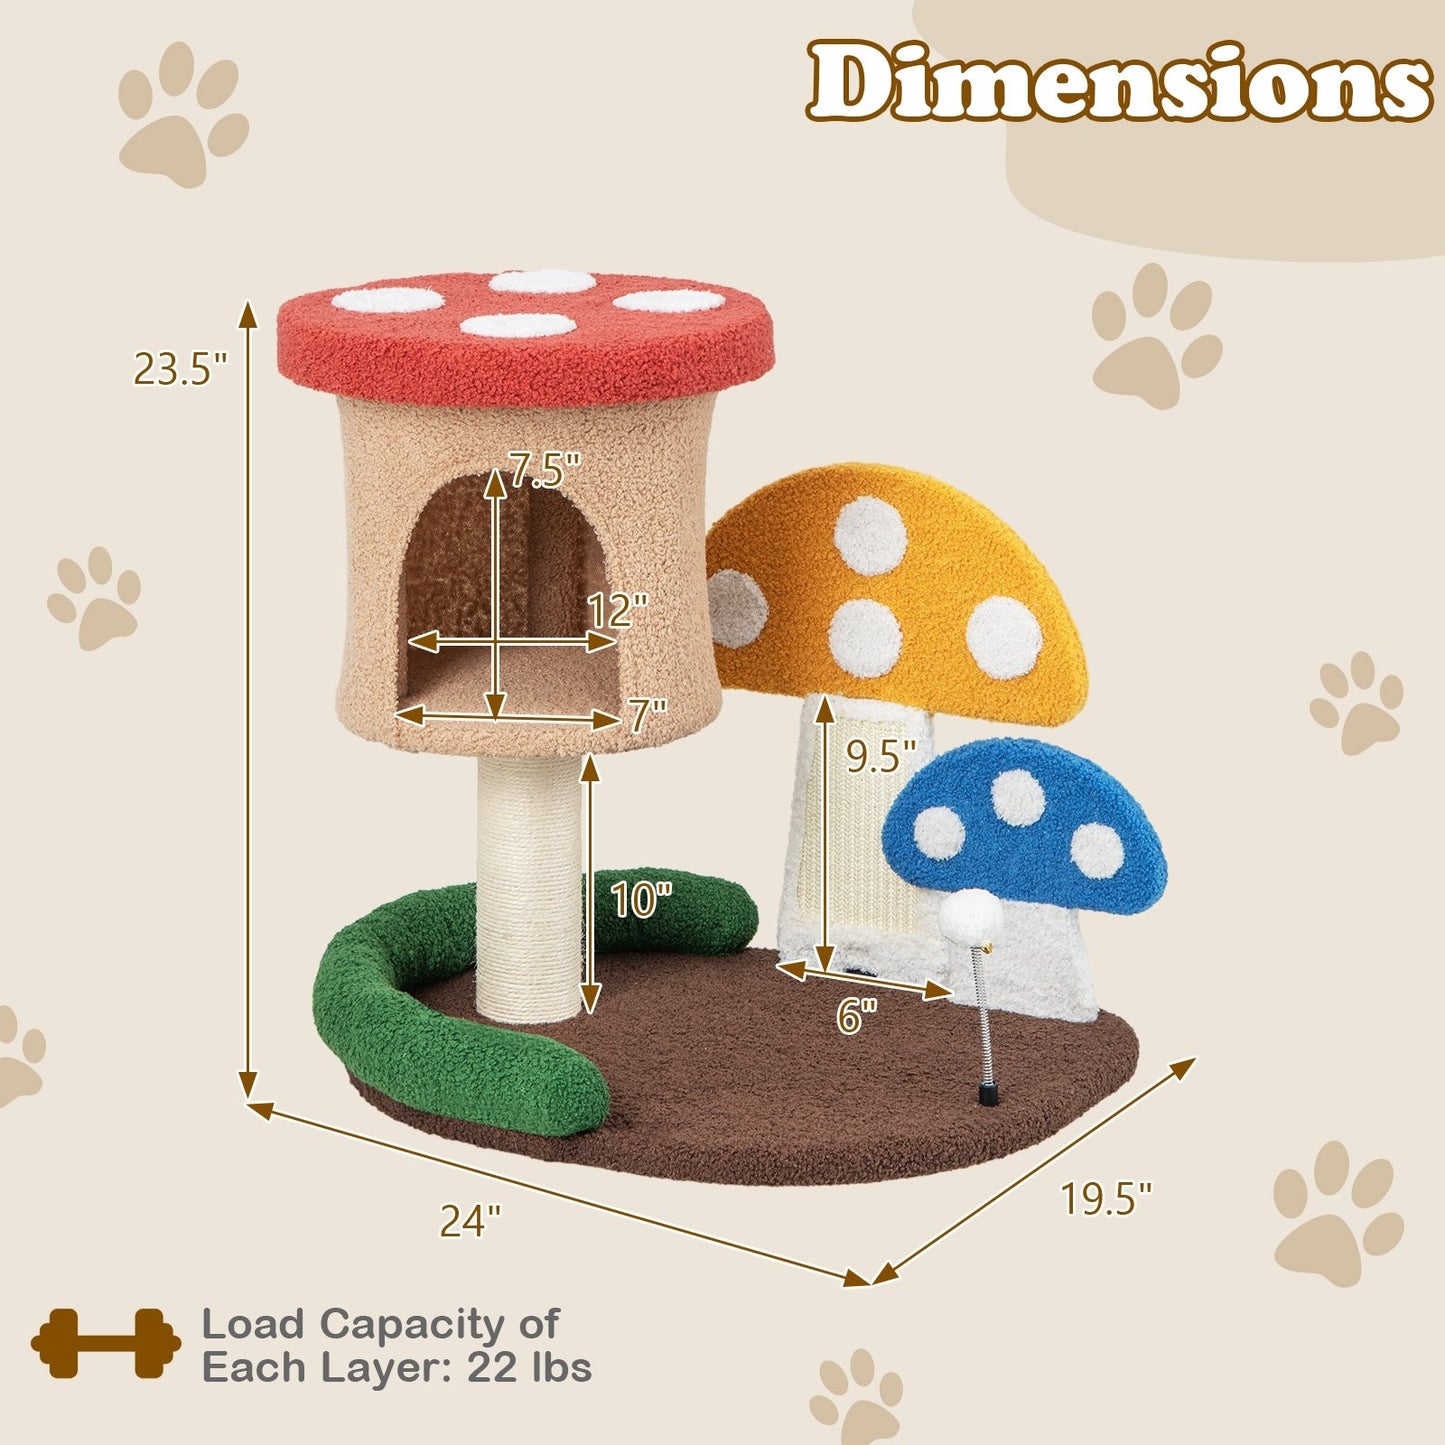 4-In-1 Cat Tree with Condo and Platform, Multicolor